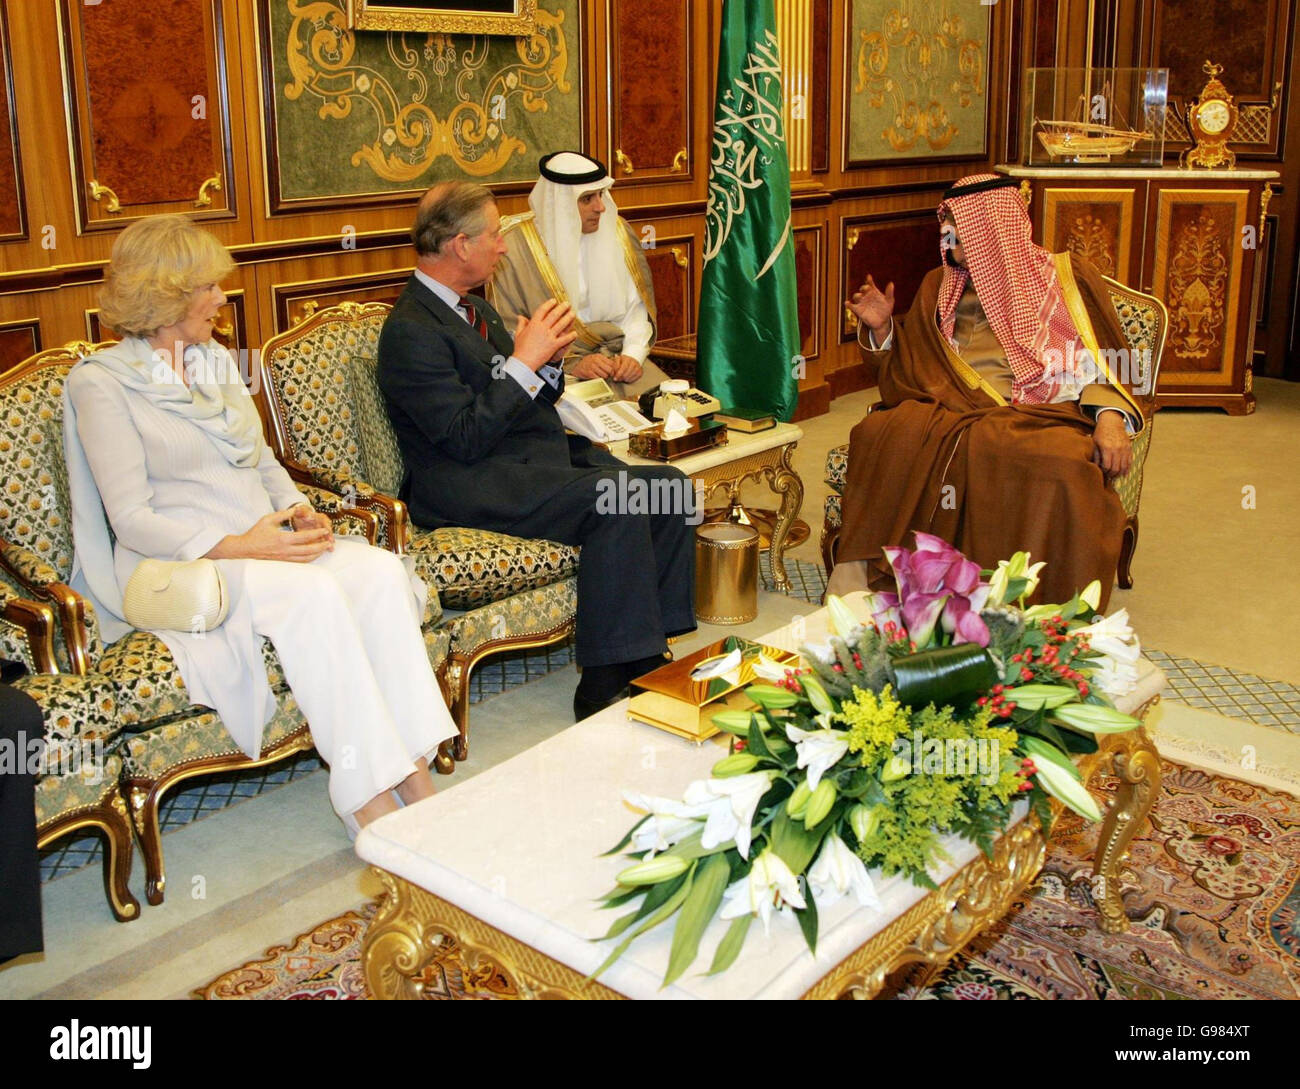 The Prince of Wales talks to King Abdullah Bin Abdulaziz, with the Duchess of Cornwall at his side, Riyadh, Saudi Arabia, Saturday March 25, 2006. Prince Charles and Camilla are spending two days in Riyadh amid intense security as they continue with their second overseas tour. See PA story ROYAL Charles. PRESS ASSOCIATION Photo. Photo credit should read: Ian Jones/Daily Telegraph Pool/PA Stock Photo